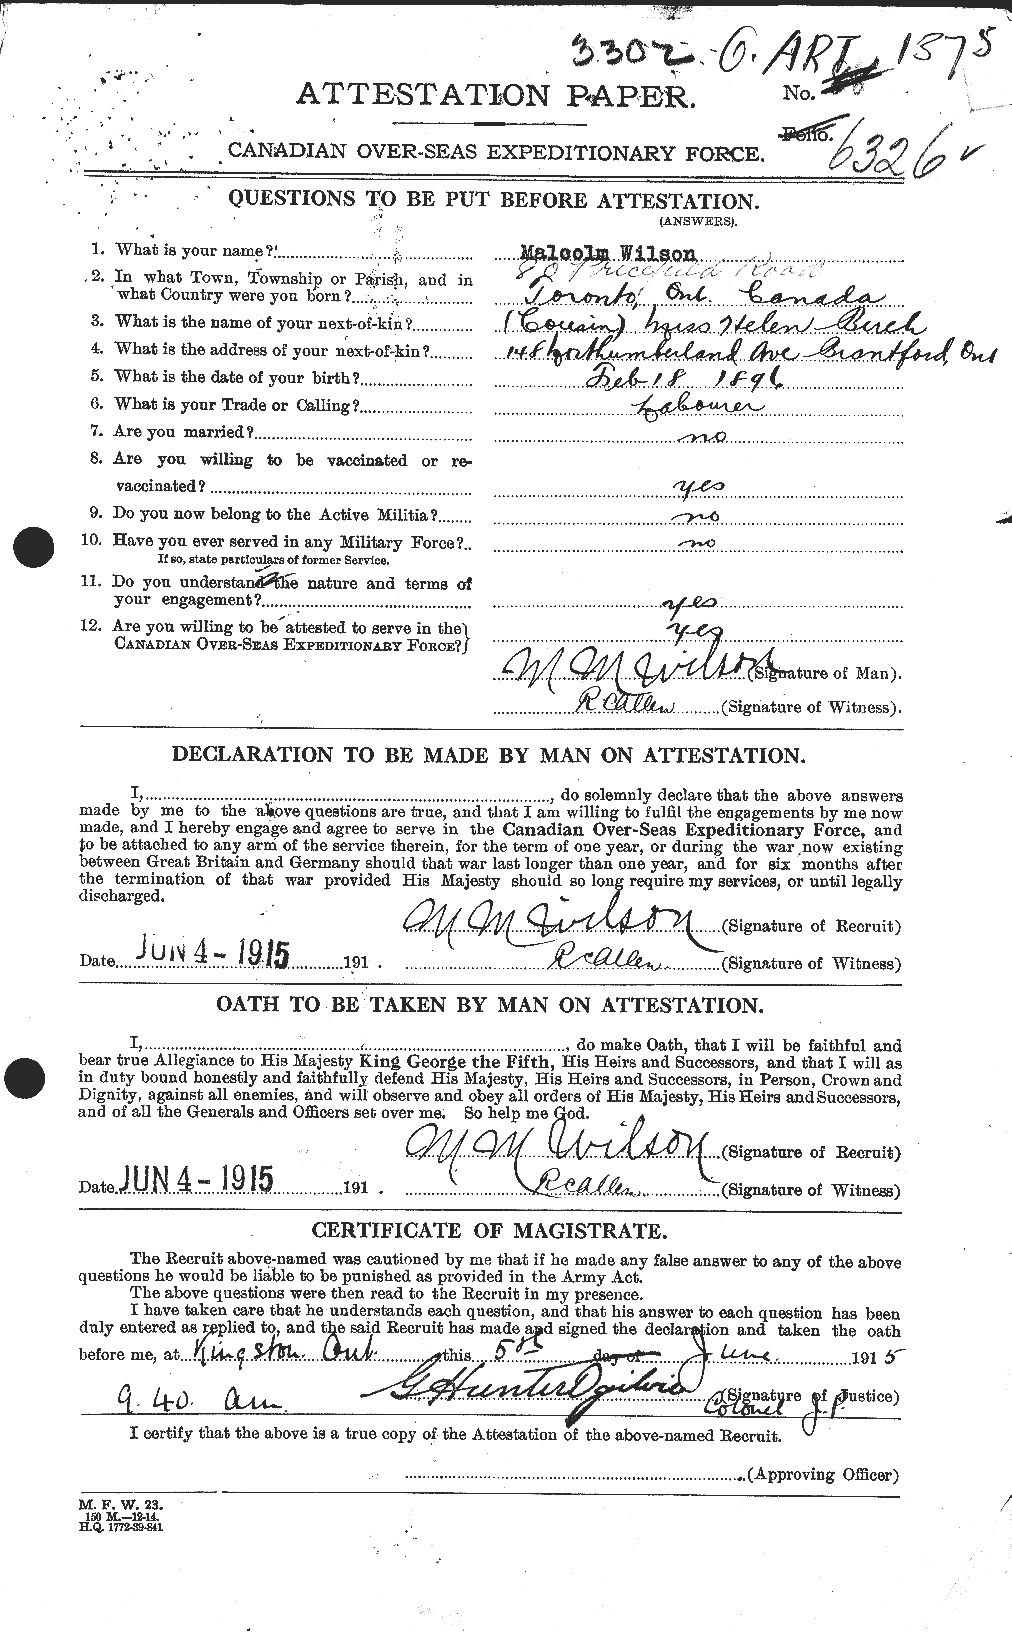 Personnel Records of the First World War - CEF 678677a